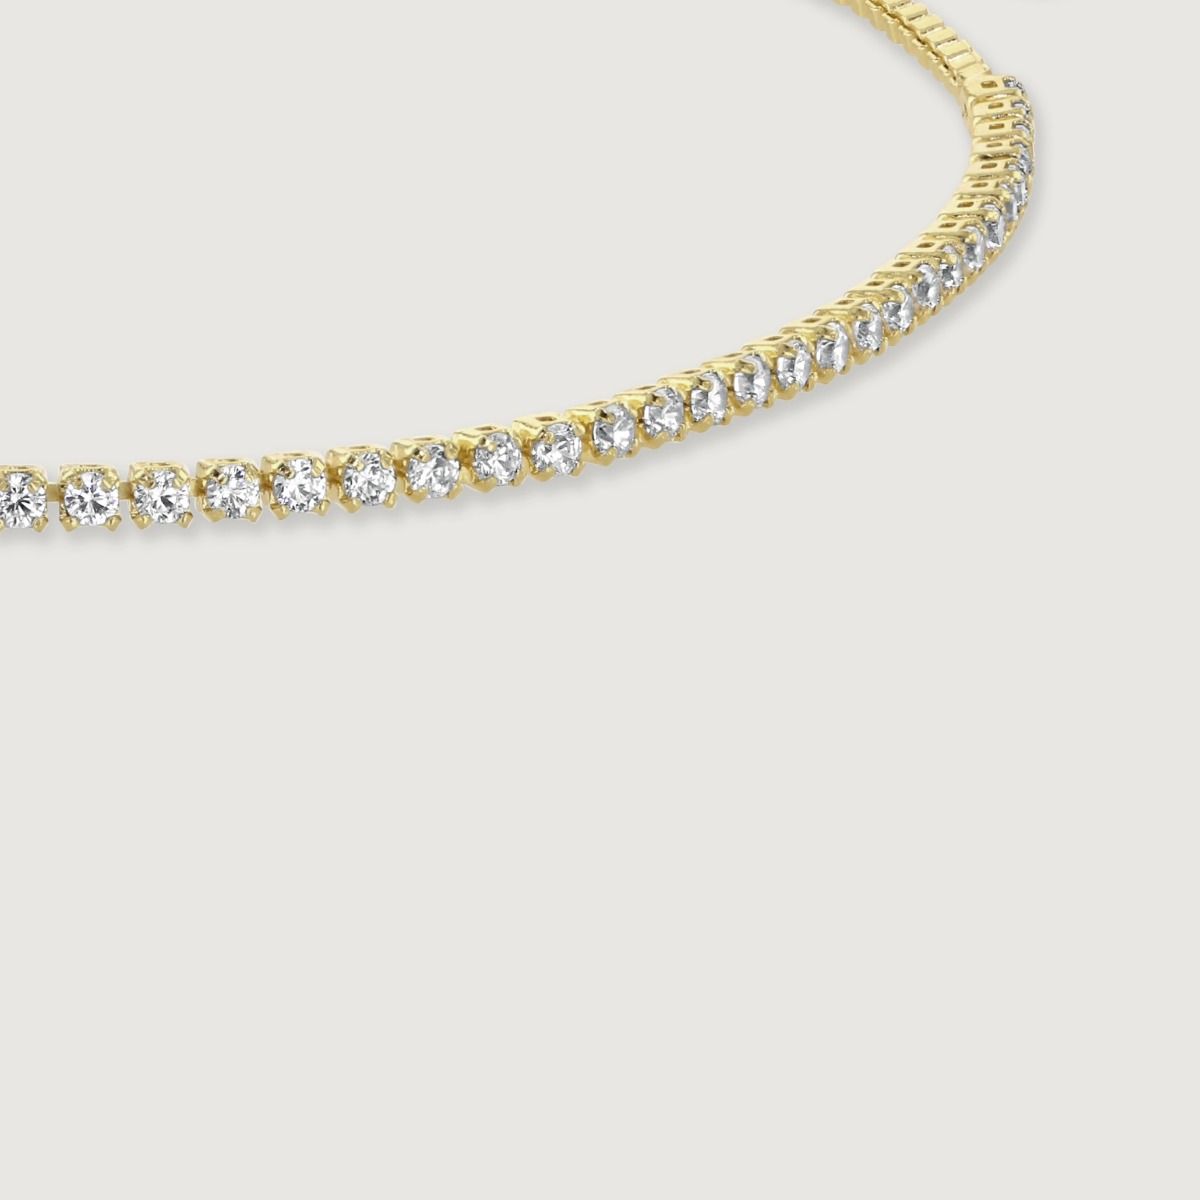 Experience the perfect blend of elegance and friendship with this gold crystal line and box chain bracelet. The shimmering crystals add a touch of glamour, while the box chain represents strength and unity. Handcrafted with love, it symbolises everlasting